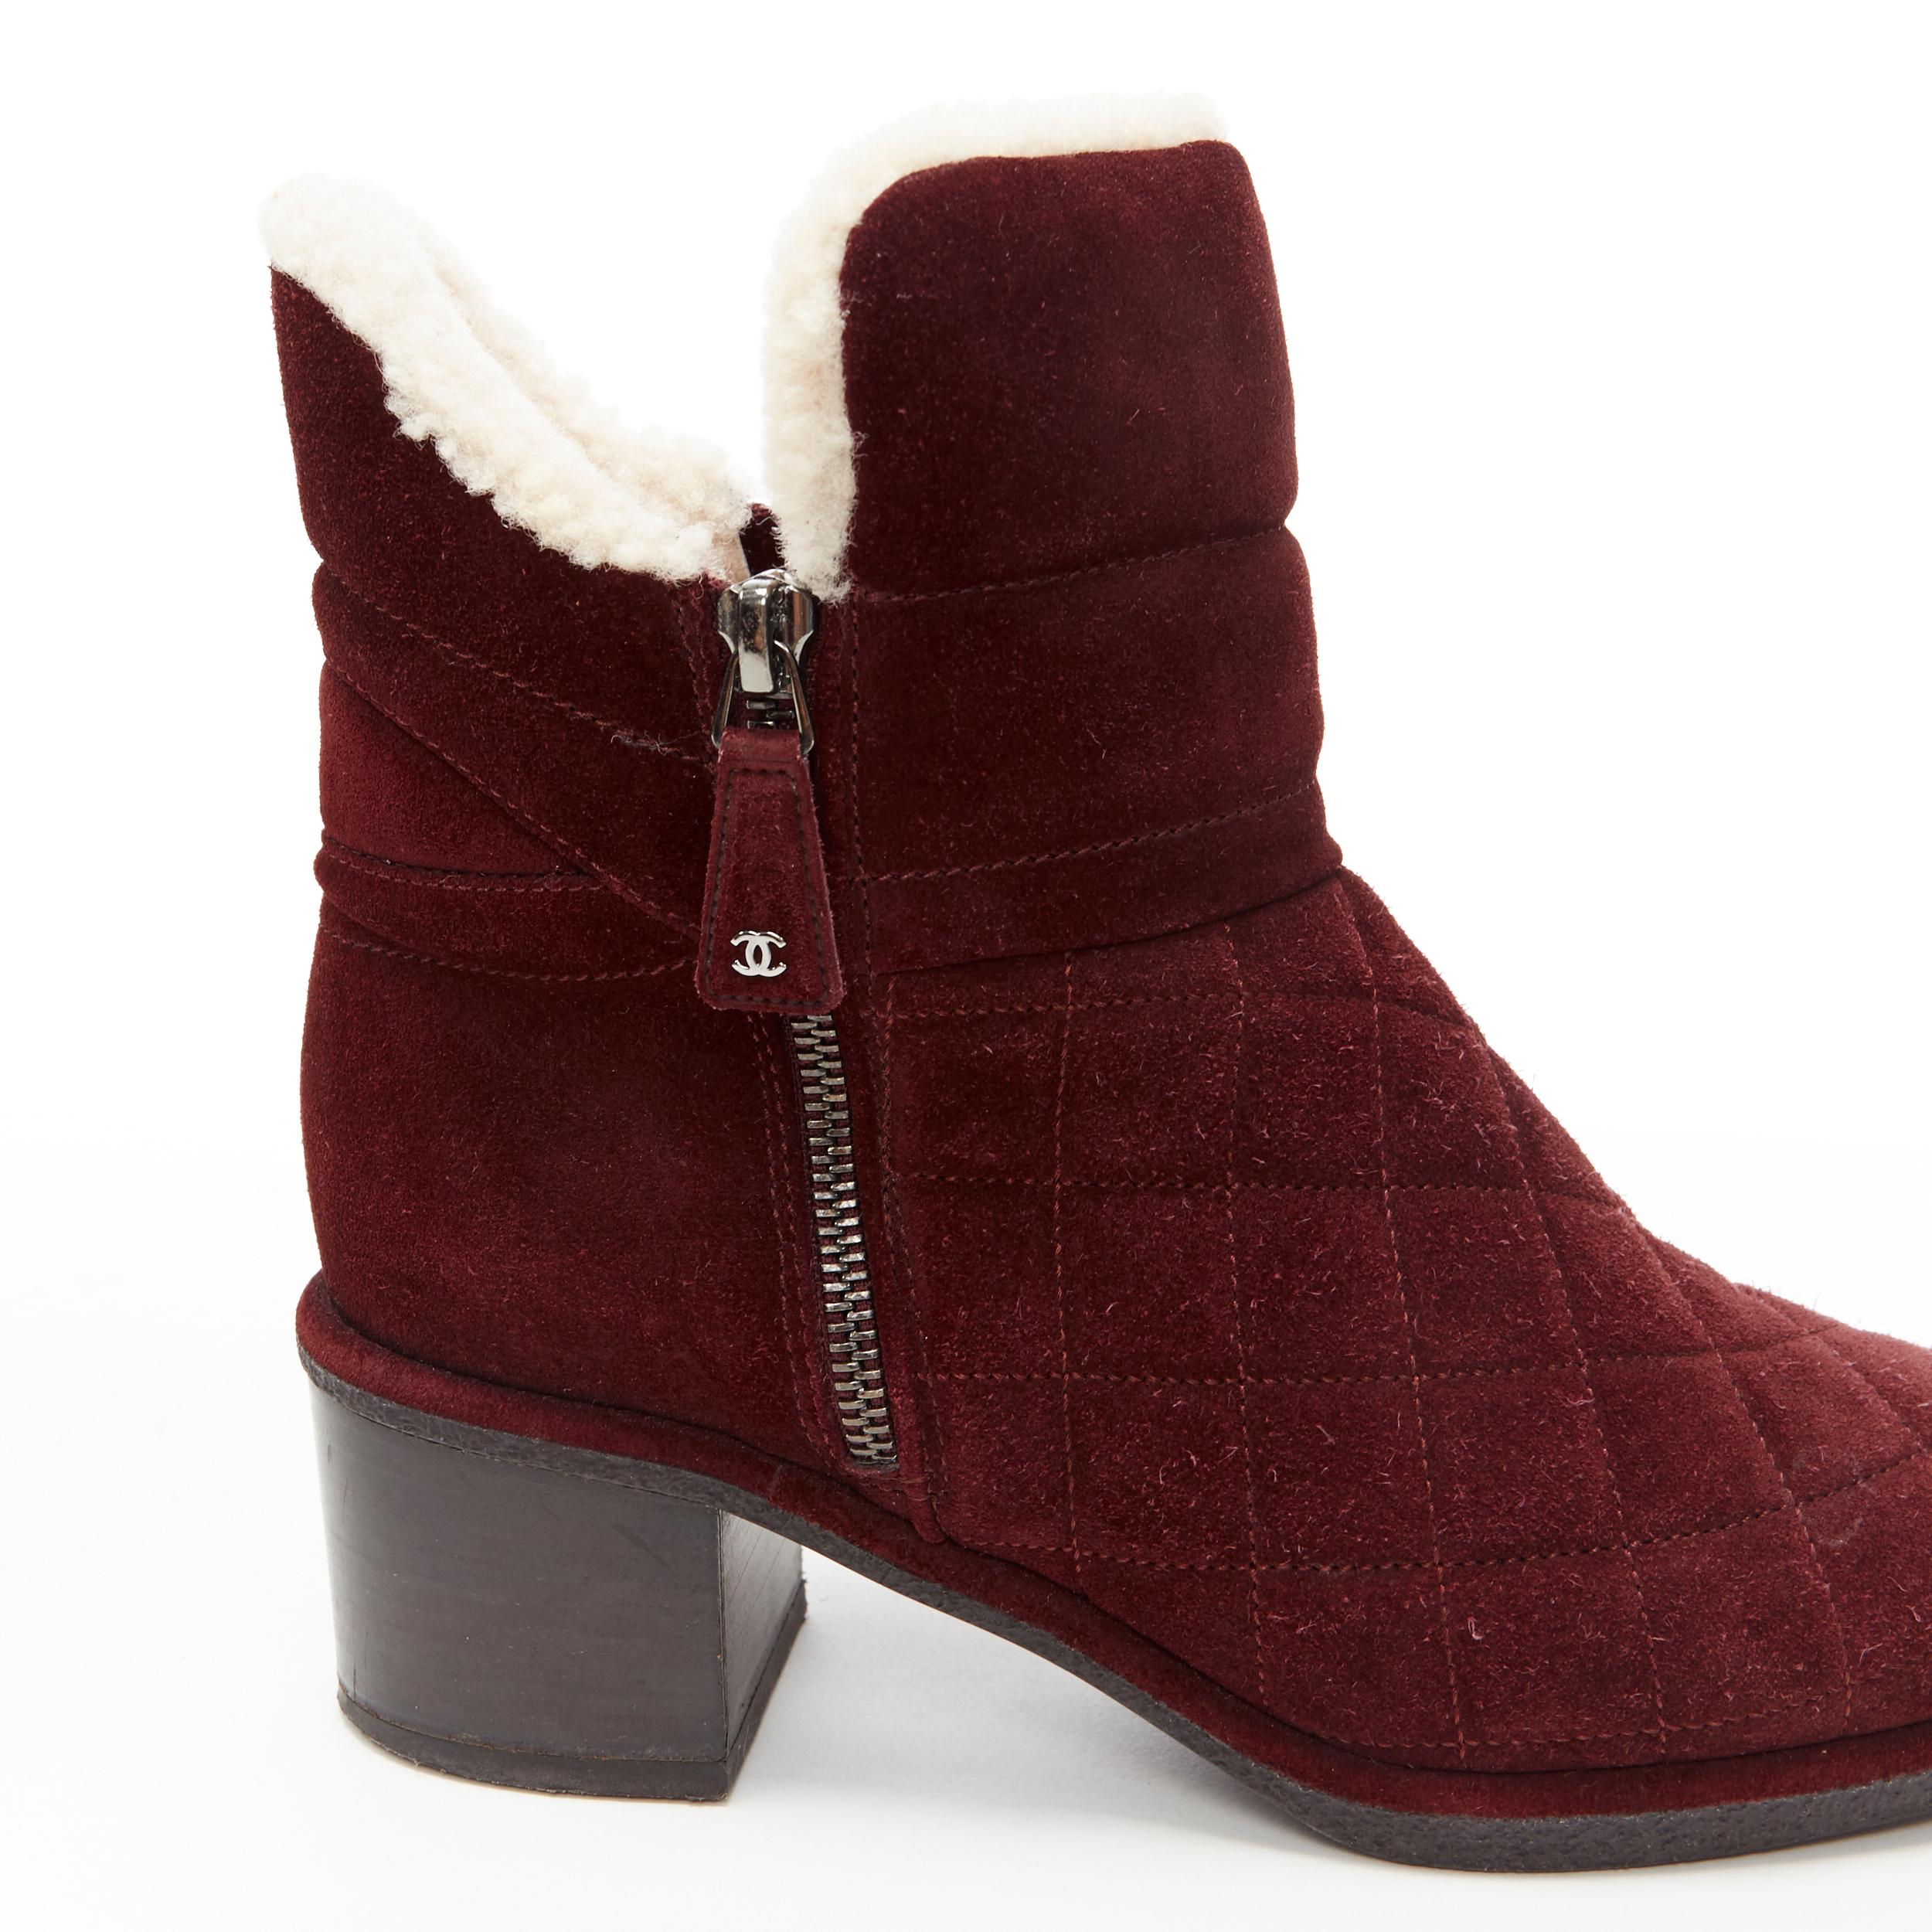 CHANEL burgundy CC red diamond quilted suede toe cap shearling ankle boot EU37 1